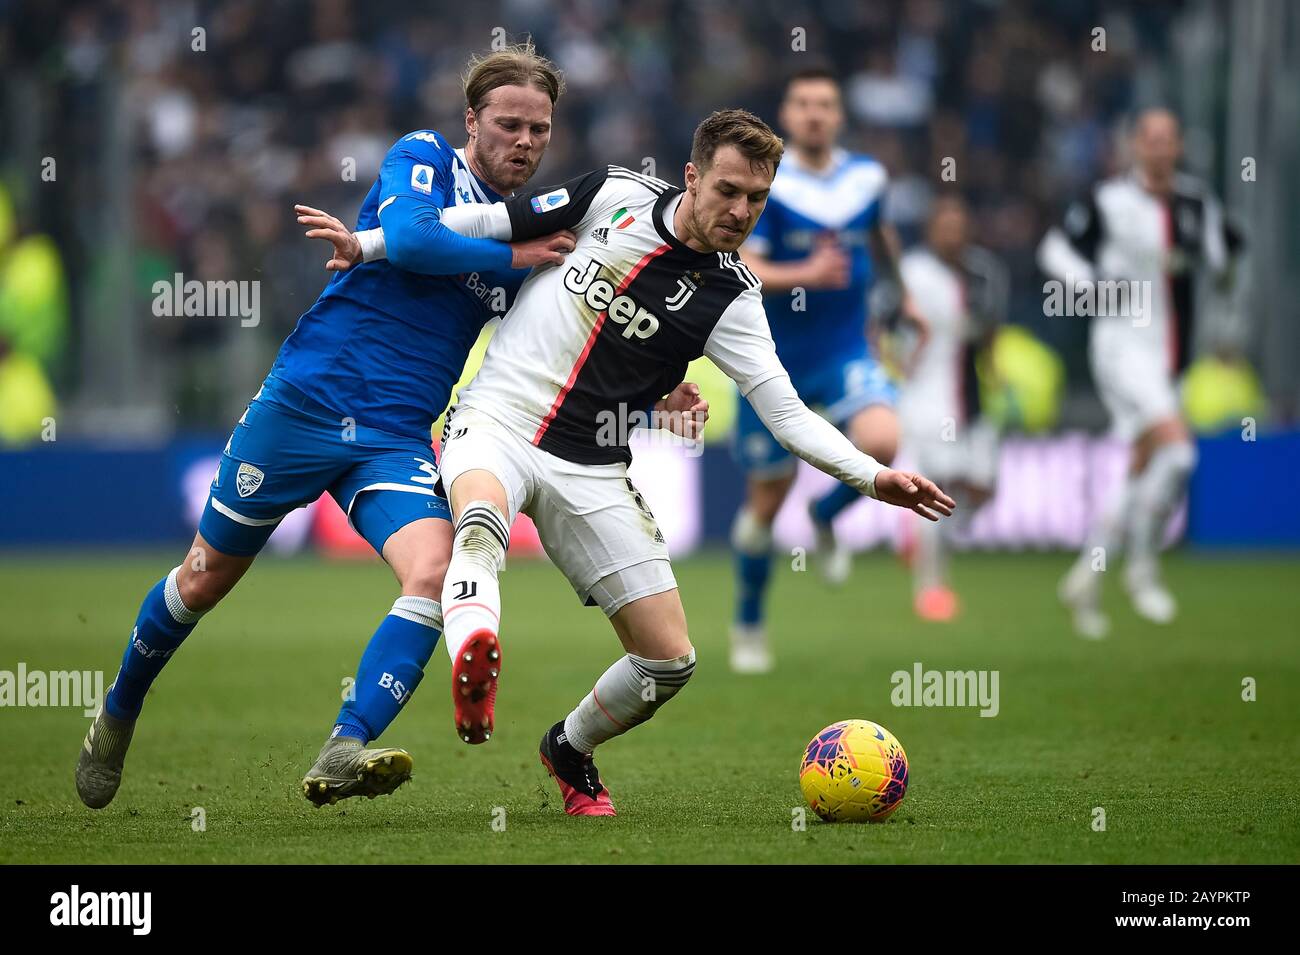 Turin, Italy - 16 February, 2020: Aaron Ramsey of Juventus FC is challenged by Birkir Bjarnason of Brescia Calcio during the Serie A football match between Juventus FC and Brescia Calcio. Credit: Nicolò Campo/Alamy Live News Stock Photo